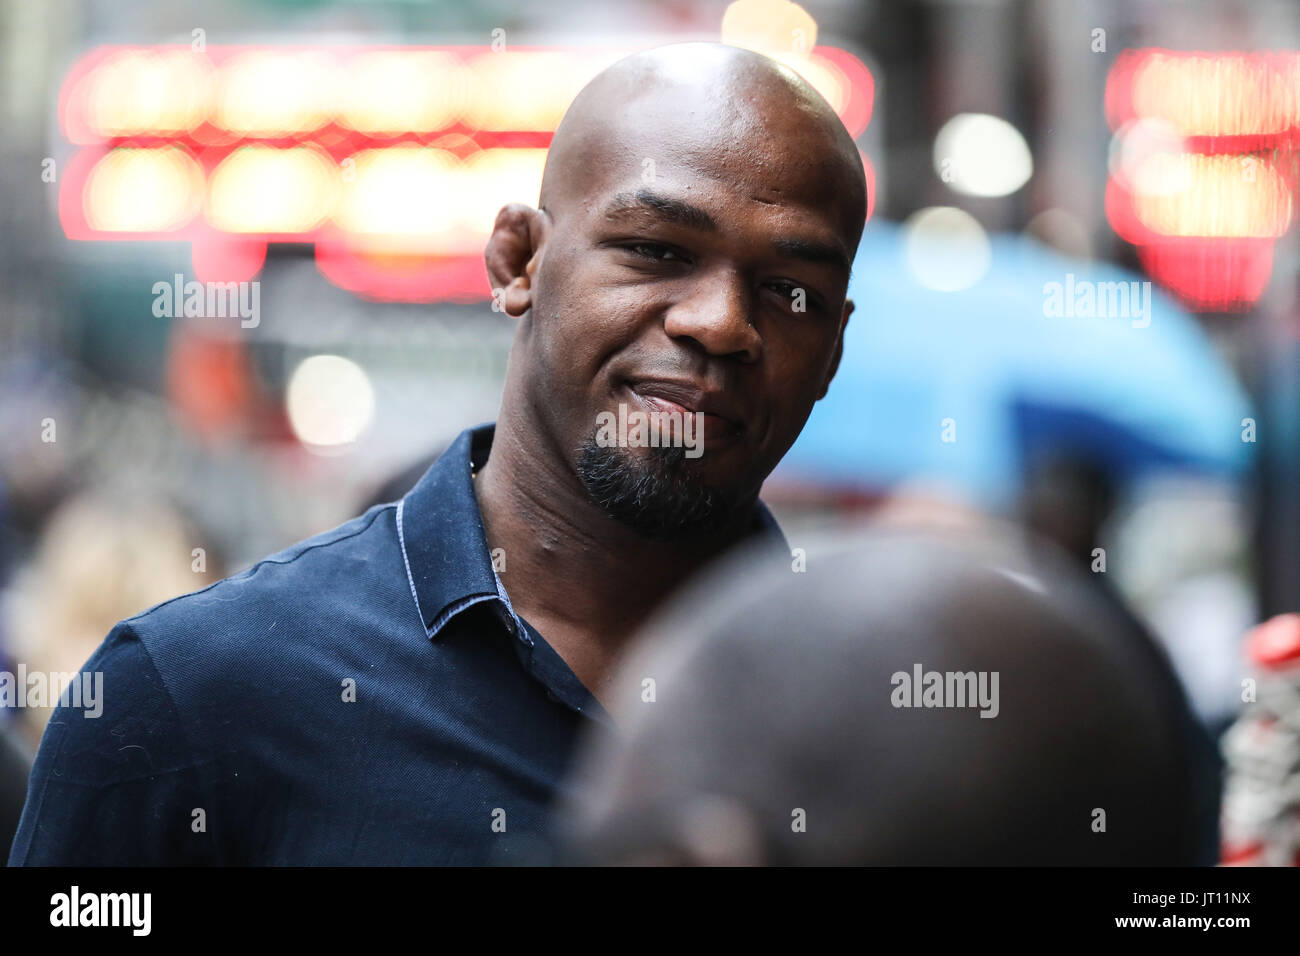 New York, USA. 07th Aug, 2017. Jonathan Dwight Jones, better known as Jon 'Bones' Jones, is an American mixed martial arts fighter, UFC heavyweight champion is seen in the Times Square region in New York this Monday Thursday, 07. (Photo: William Volcov/Brazil Photo Press) Stock Photo